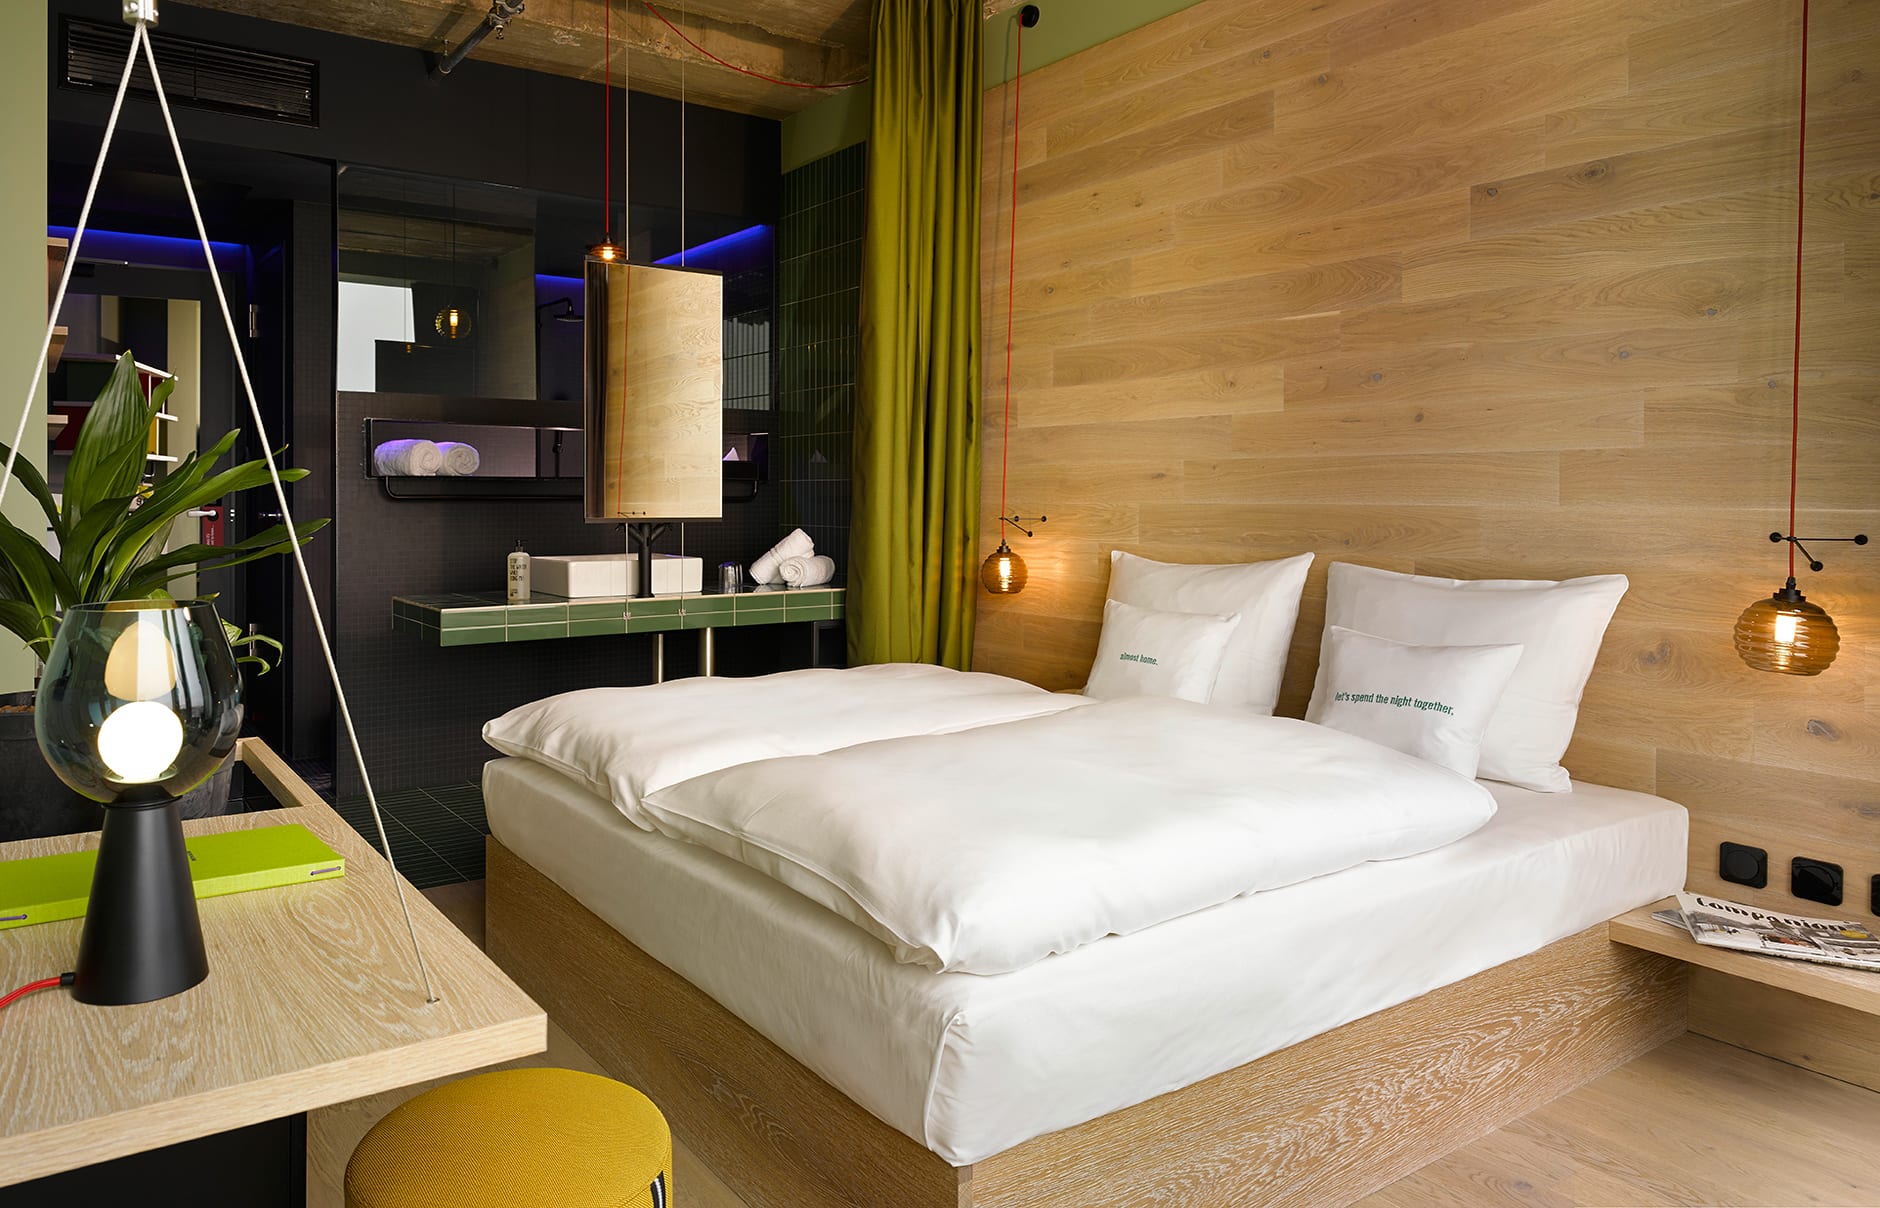 25hours Hotel Bikini Berlin, Germany. Hotel Review by TravelPlusStyle. Photo © 25hours Hotels 